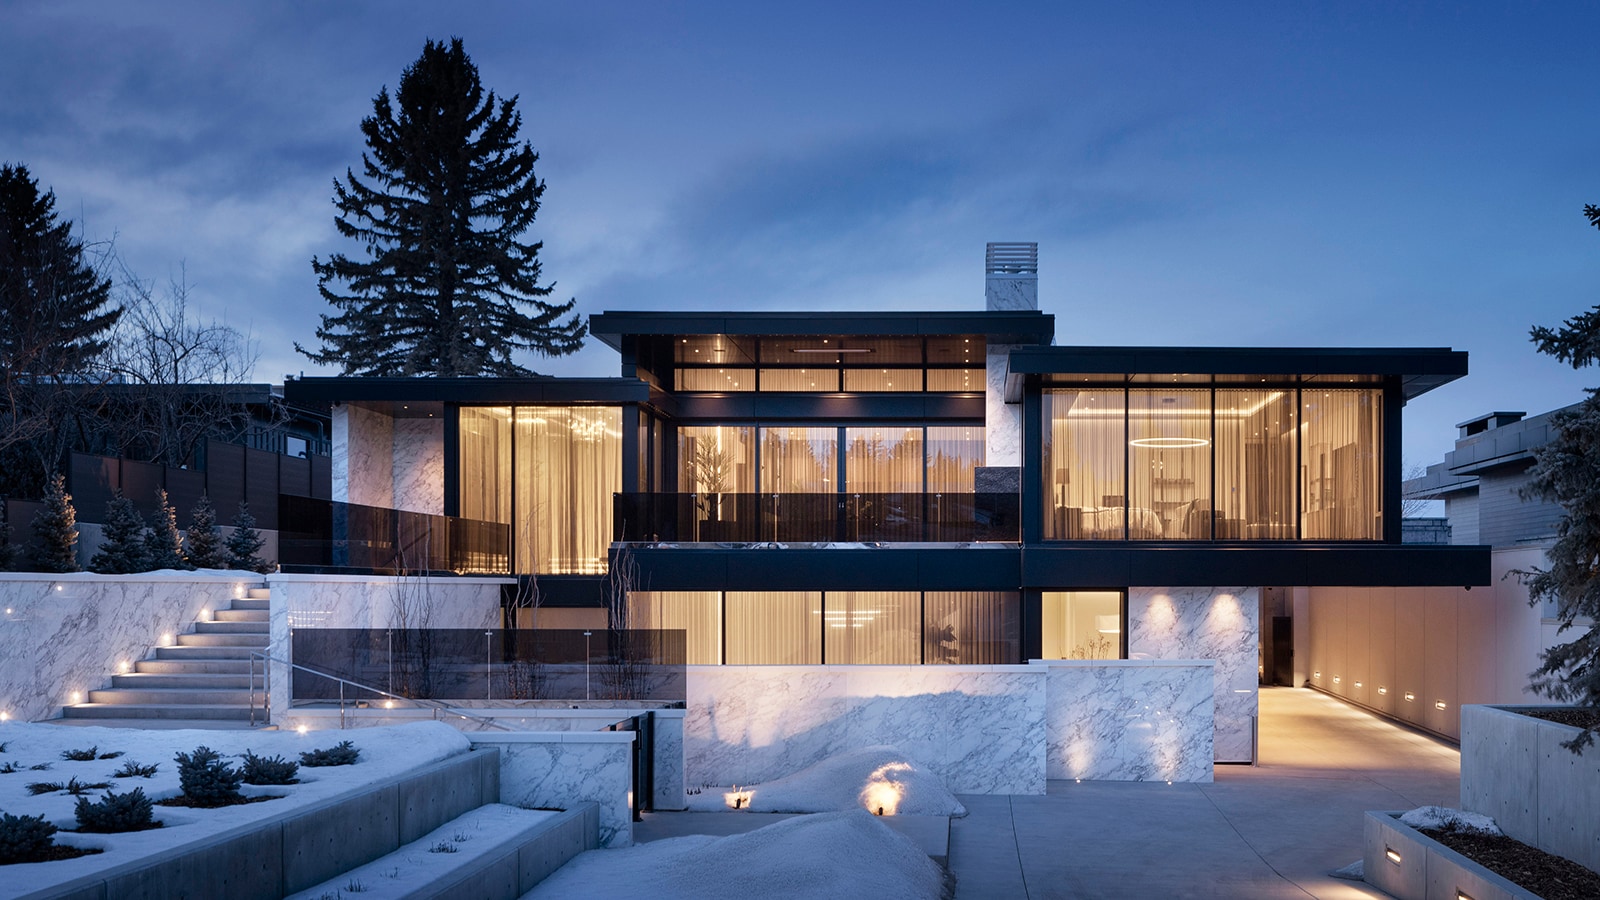 Alberta Residence, Canadian sophistication without limits